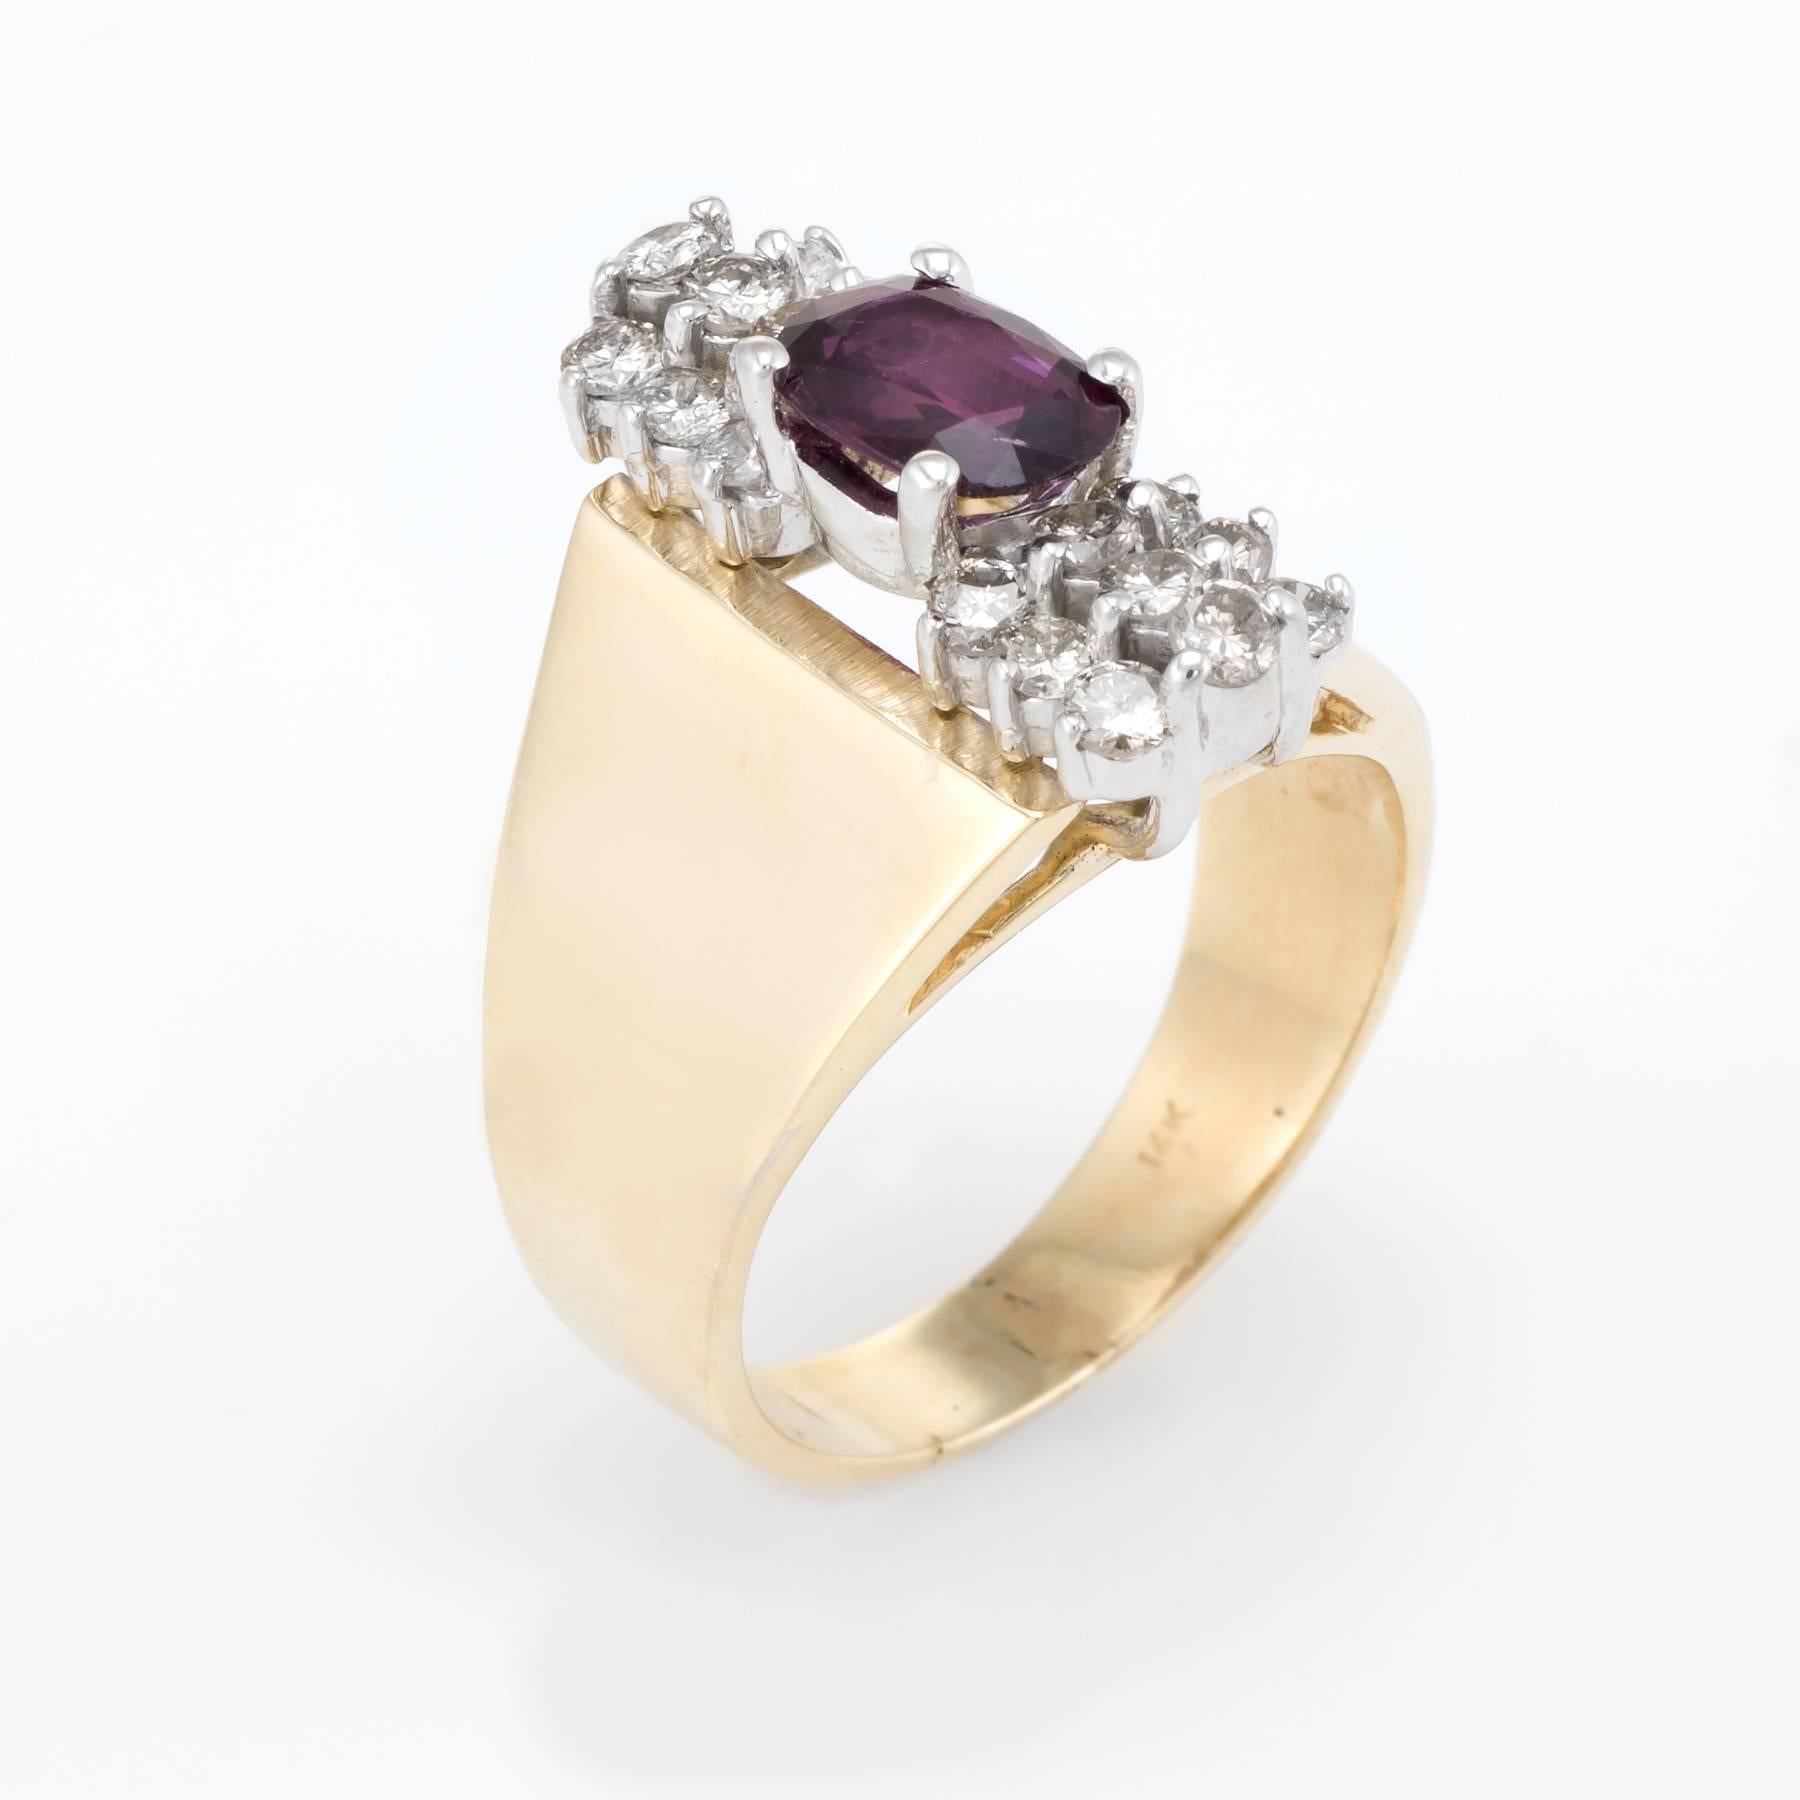 Elegant vintage cocktail ring (circa 1970s), crafted in 14 karat yellow gold. 

Faceted oval cut ruby measures 7.5mm x 5mm (estimated at 0.80 carats), accented with 18 x .04 estimated round brilliant cut diamonds. The total diamond weight is